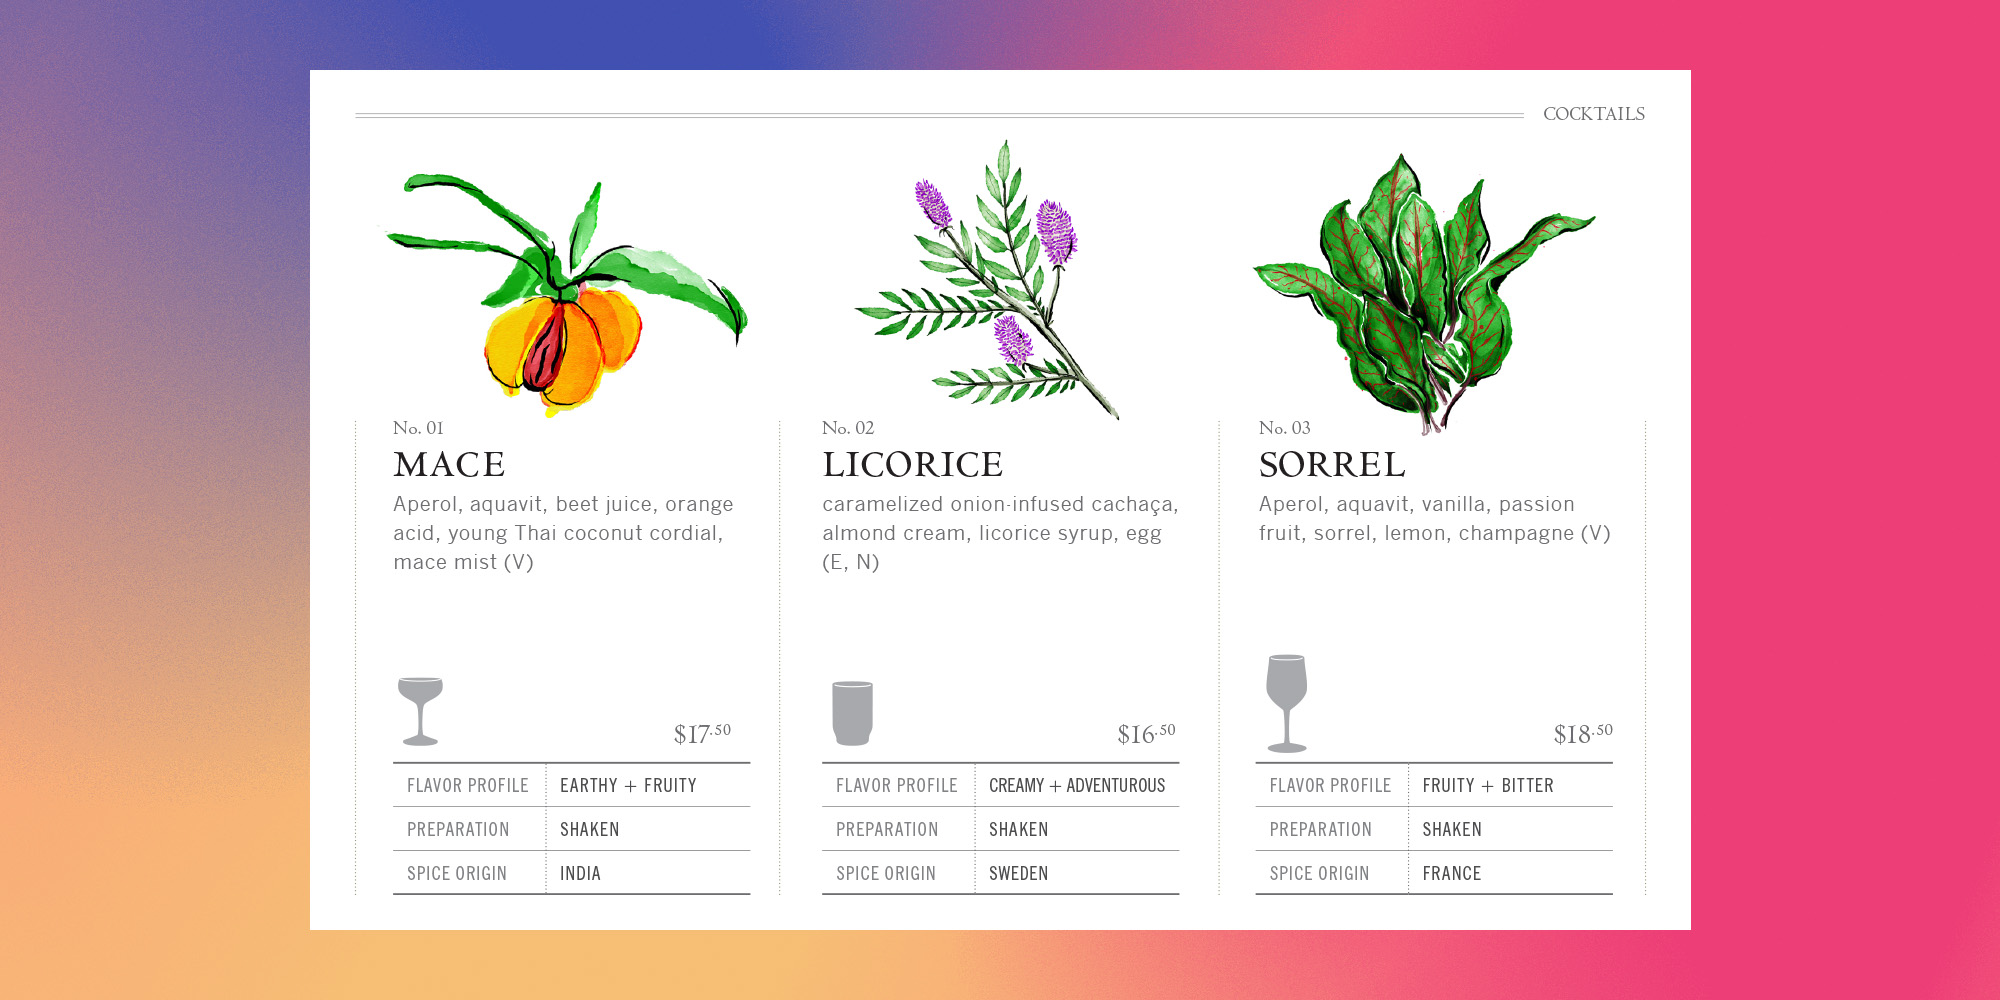 These Design-Forward Cocktail Menus Let You Drink With Your Eyes